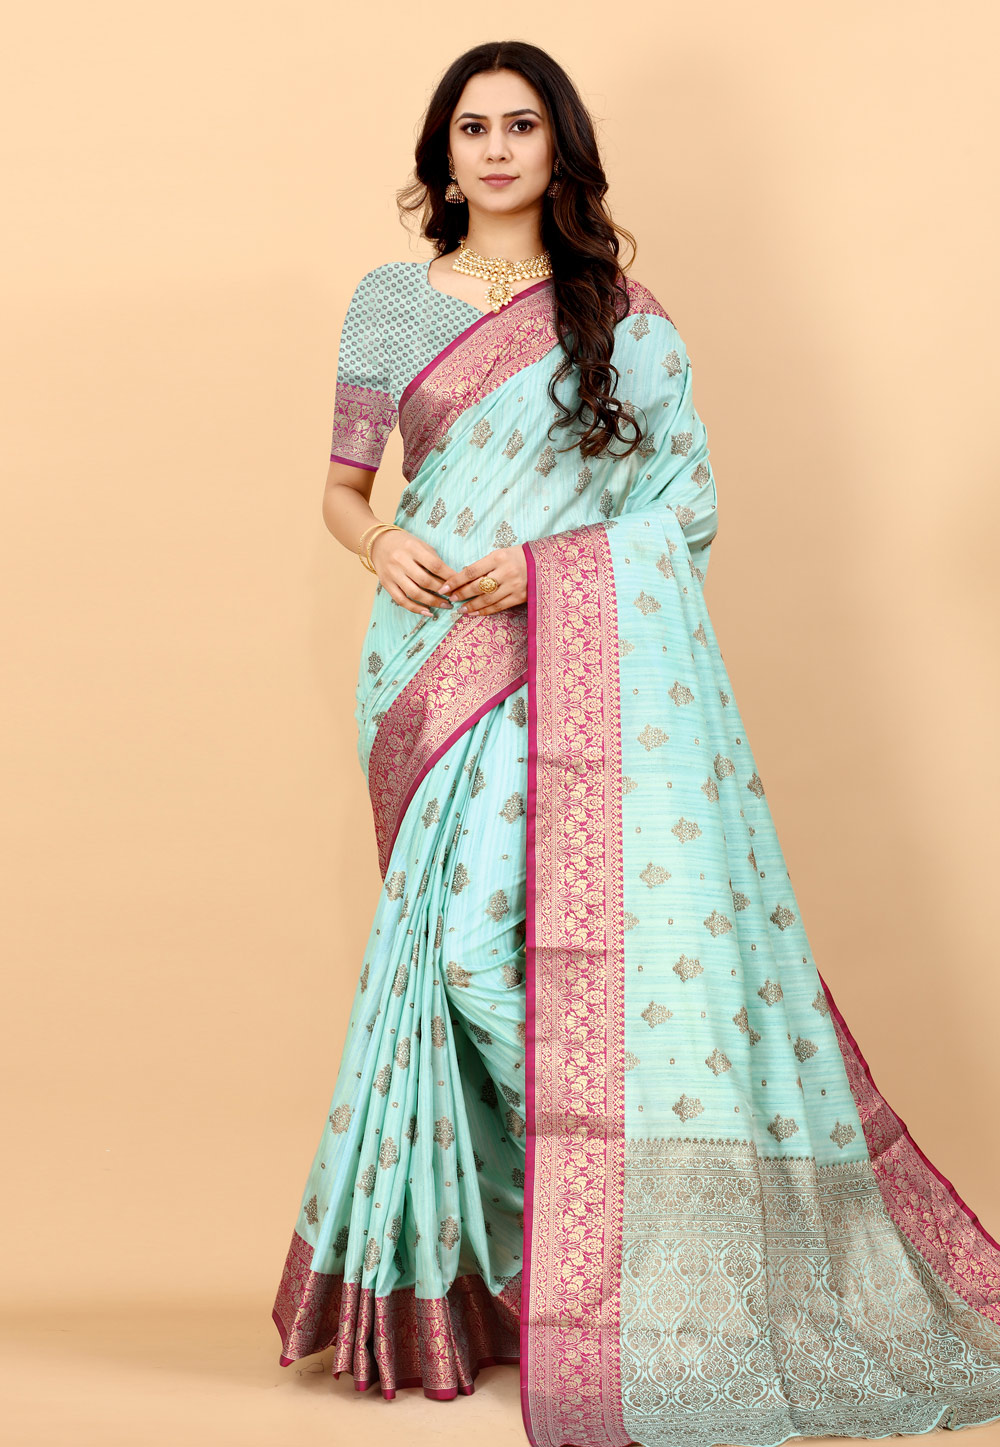 MIMOSA Art silk Wedding saree Kanjivarm Pattu style With Contrast Blouse  Color: Turquoise (4311-370-2D-AND-MST) : Amazon.in: Fashion